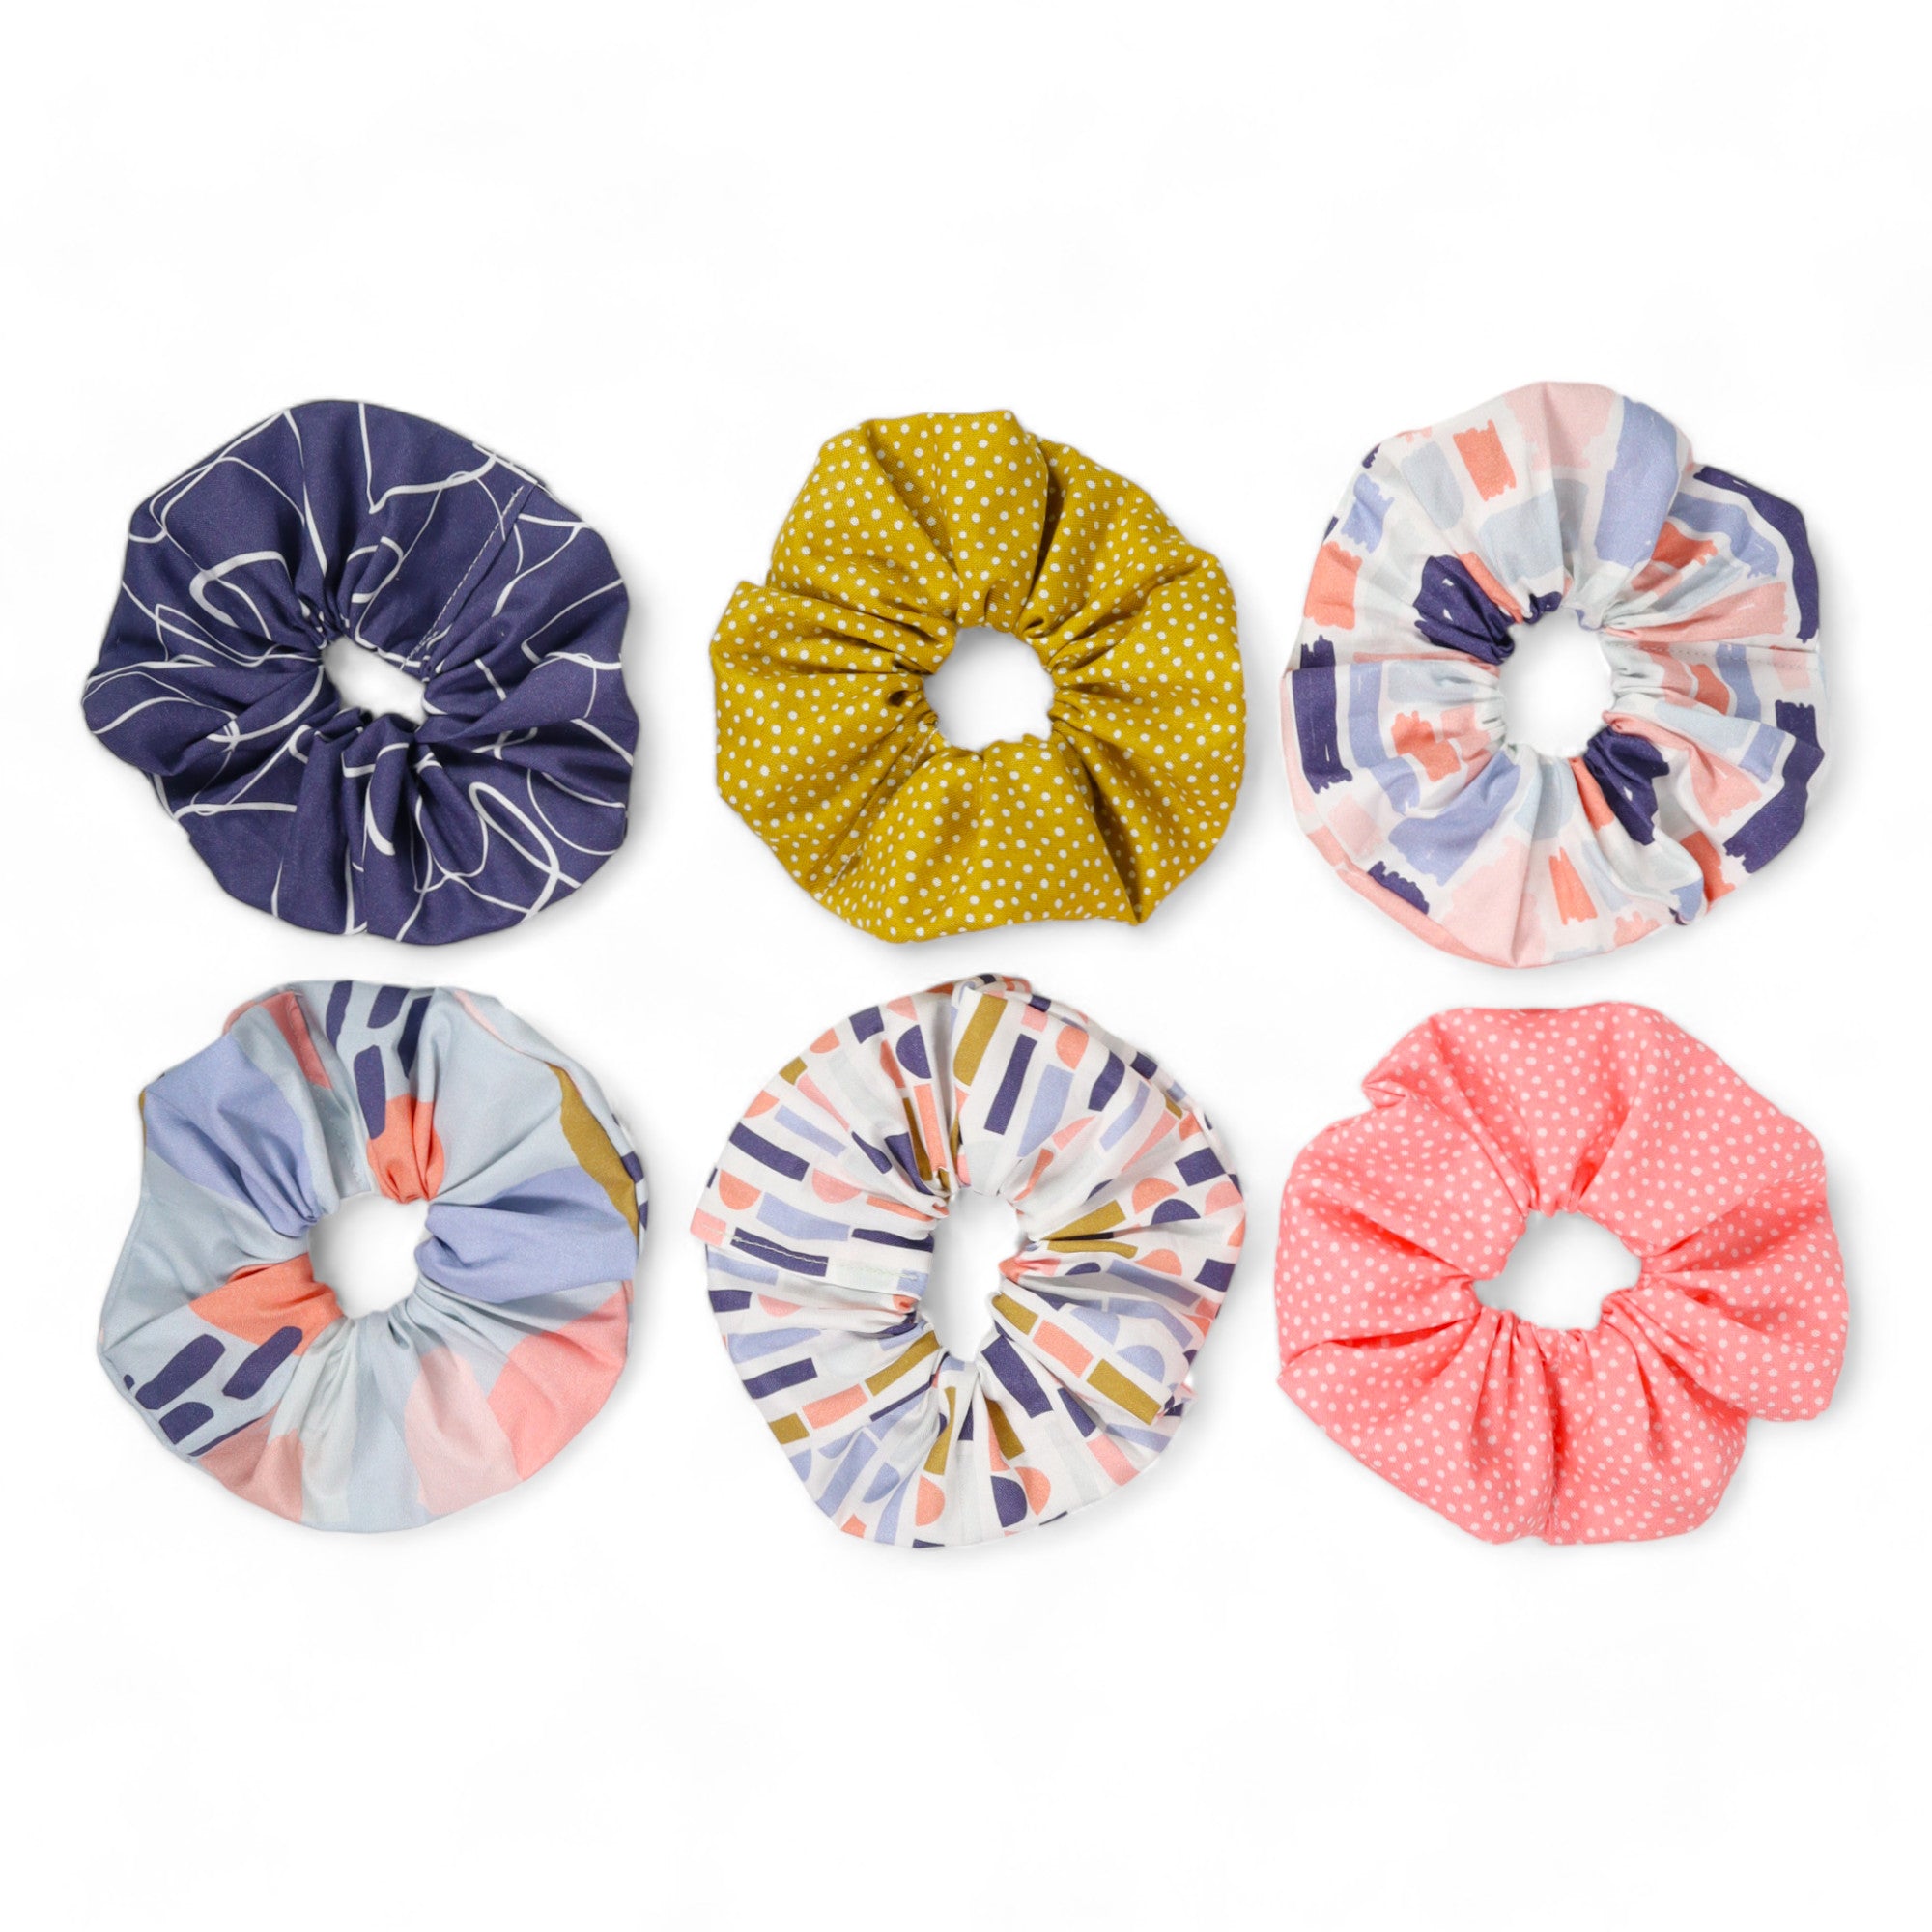 Crosscut Sewing Co. Scrunchie Sewing Kit - Abstract Blue